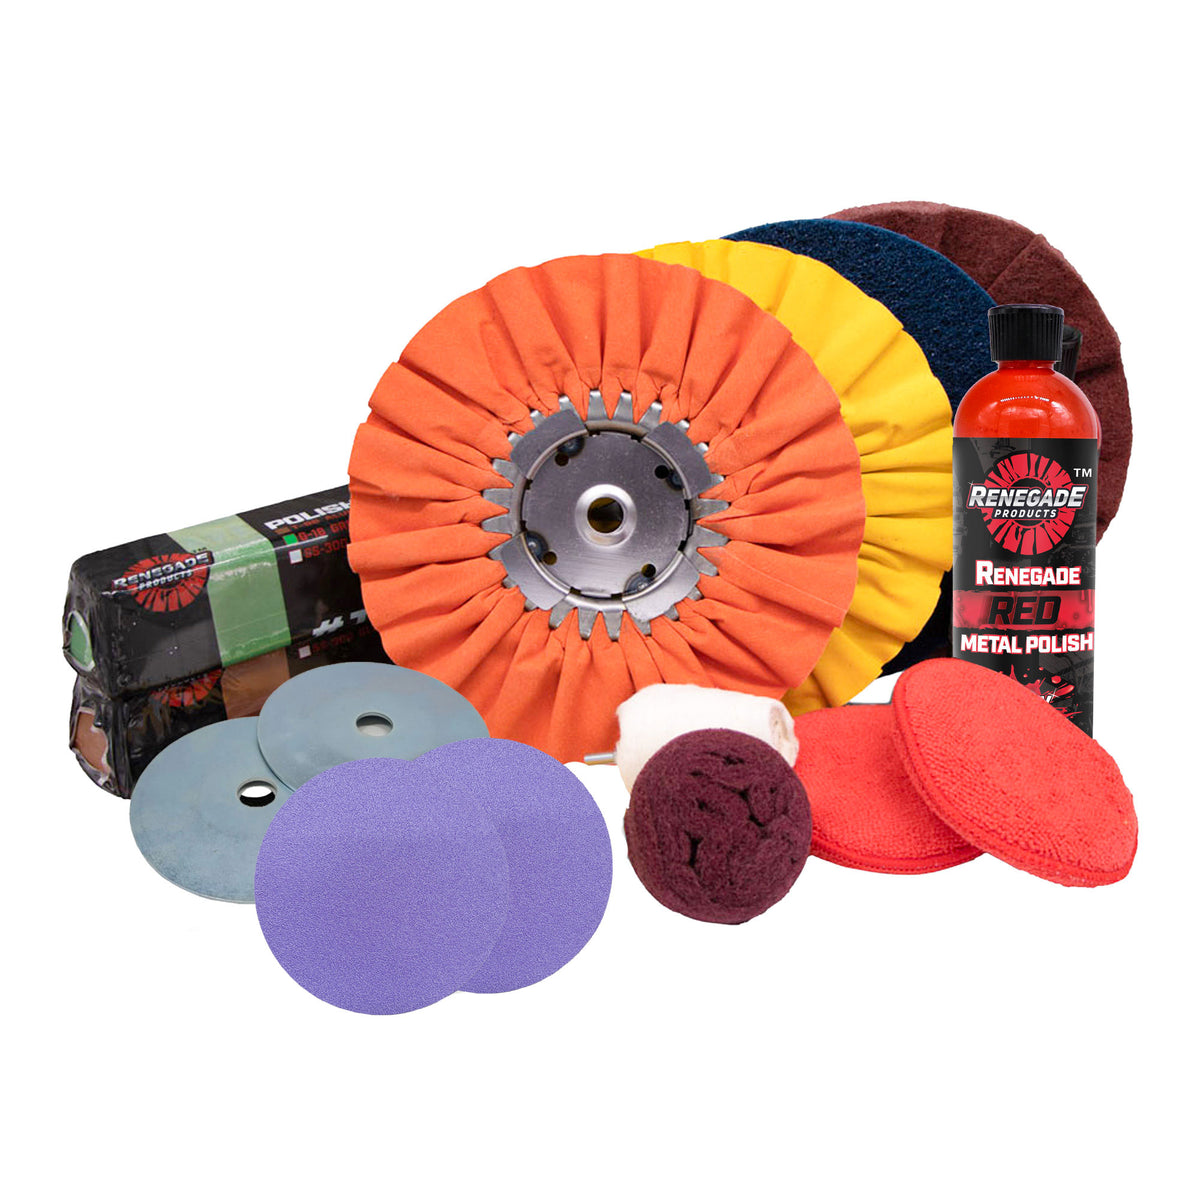 Renegade Products Big Rig & Semi Truck Metal Polishing Complete Kit with  Buffing Wheels, Buffing Compound, Safety Flanges, Polishing Accessories and  Rebel Red Liquid Metal Polish 